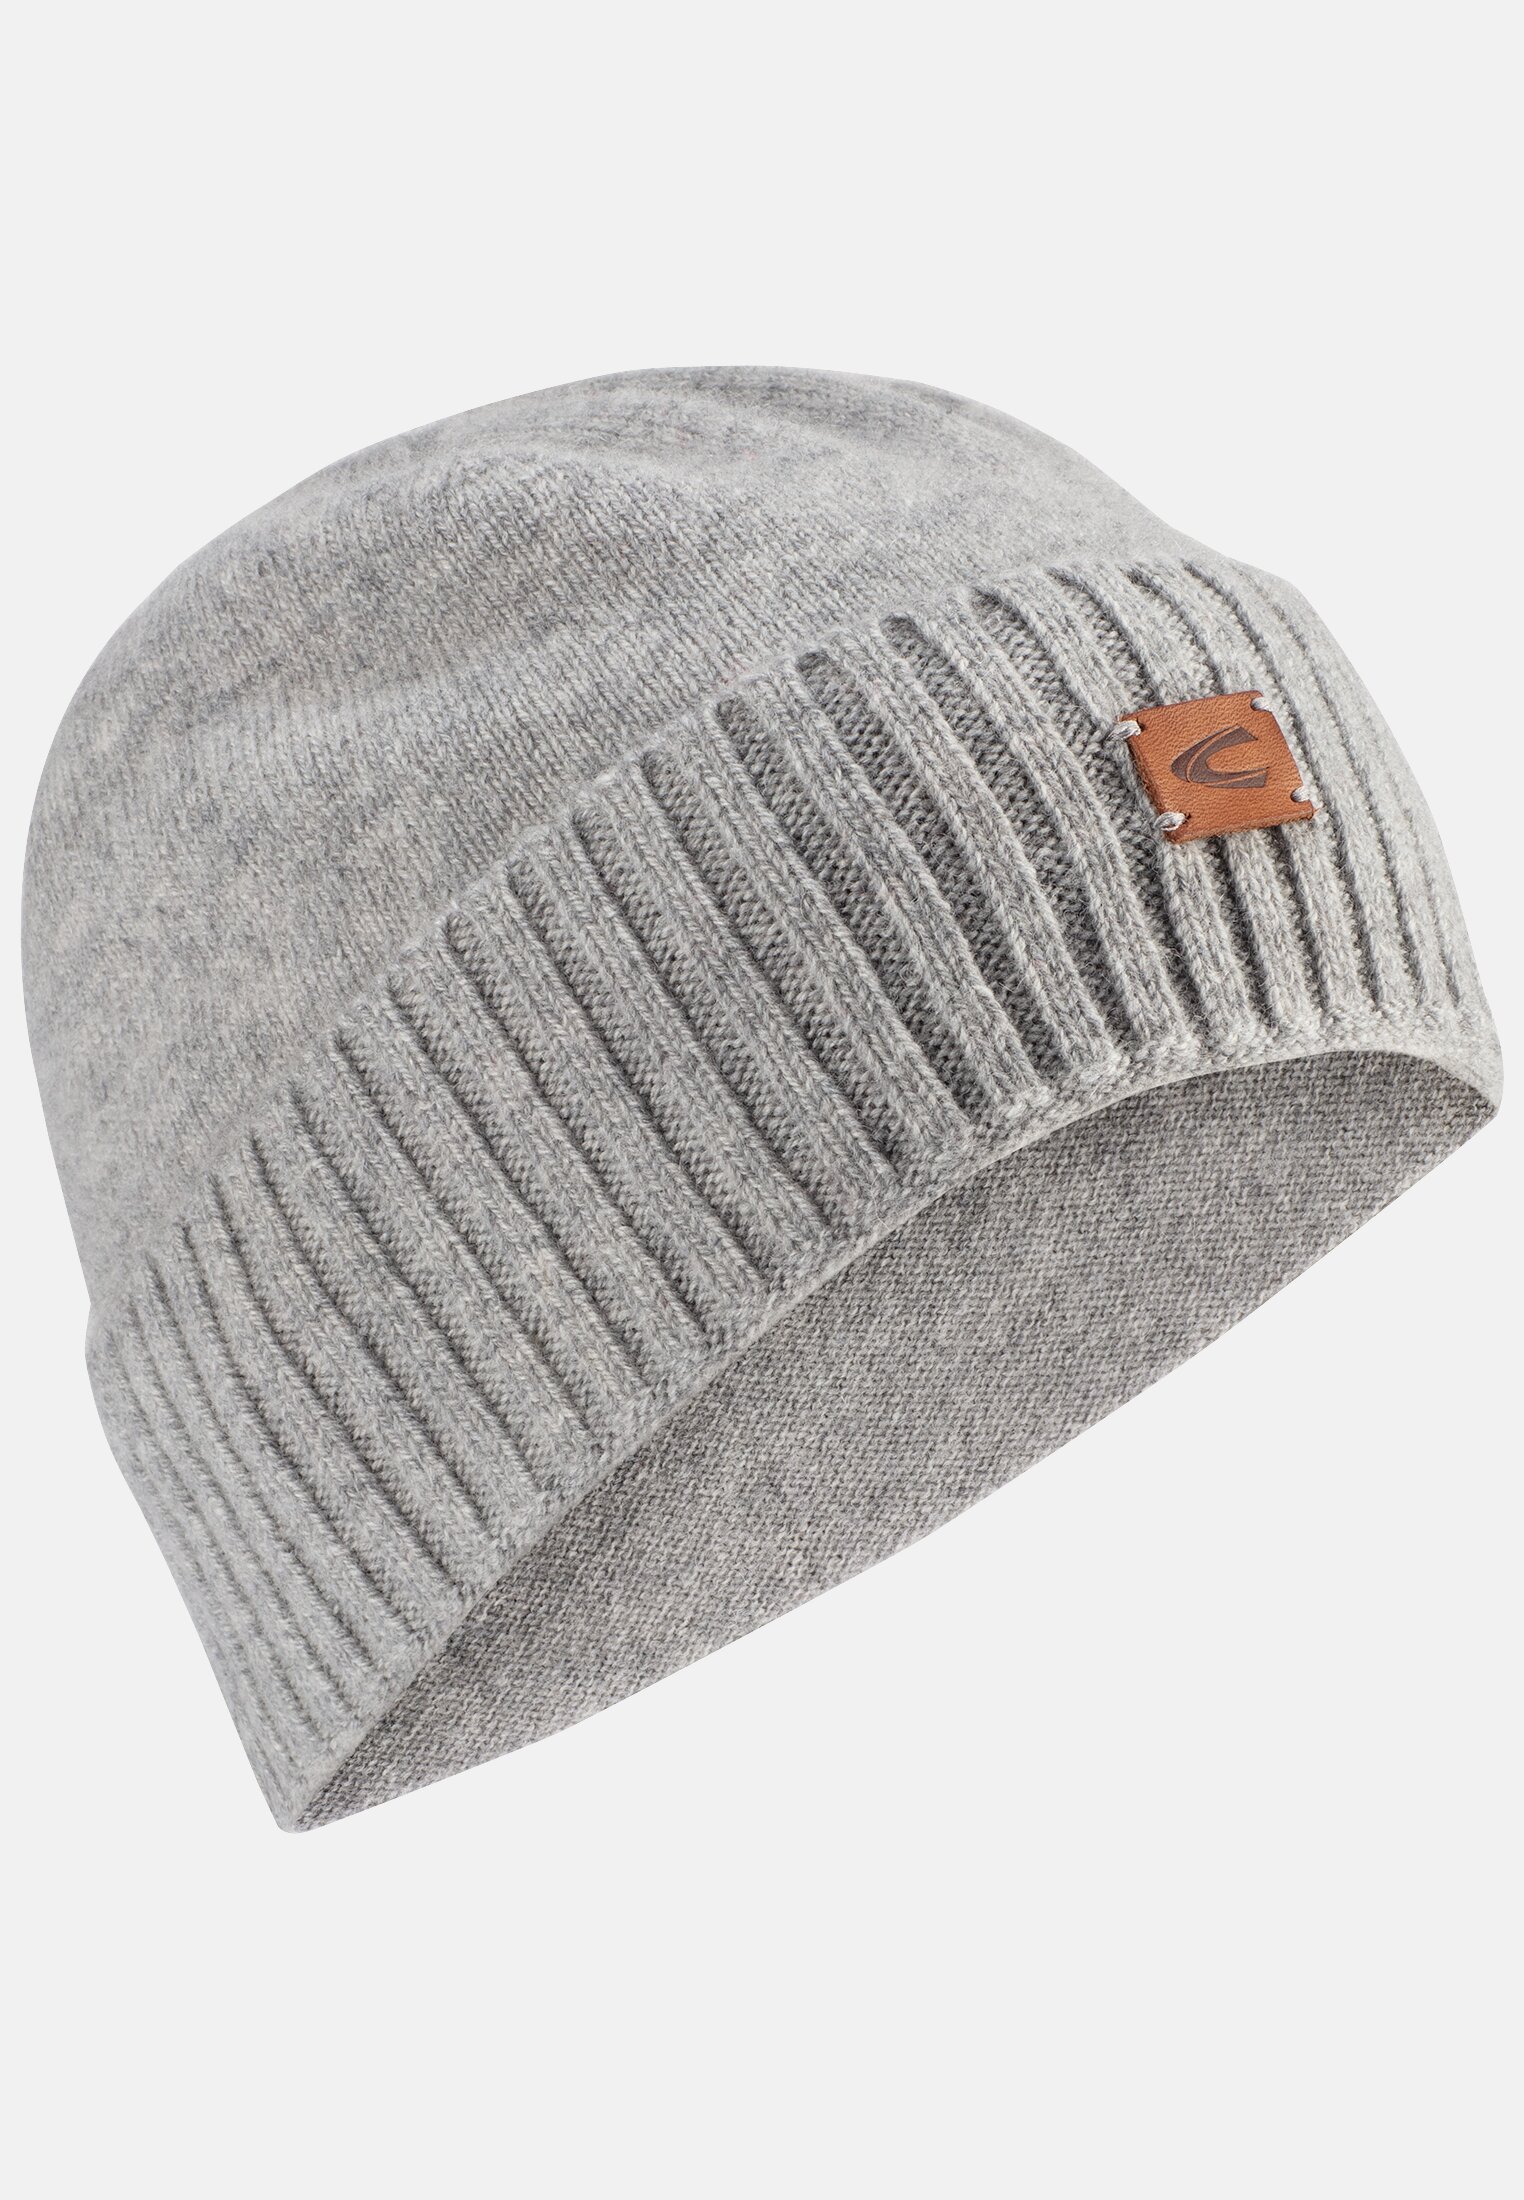 Knitted cap for Herren in | OS Grey | active camel